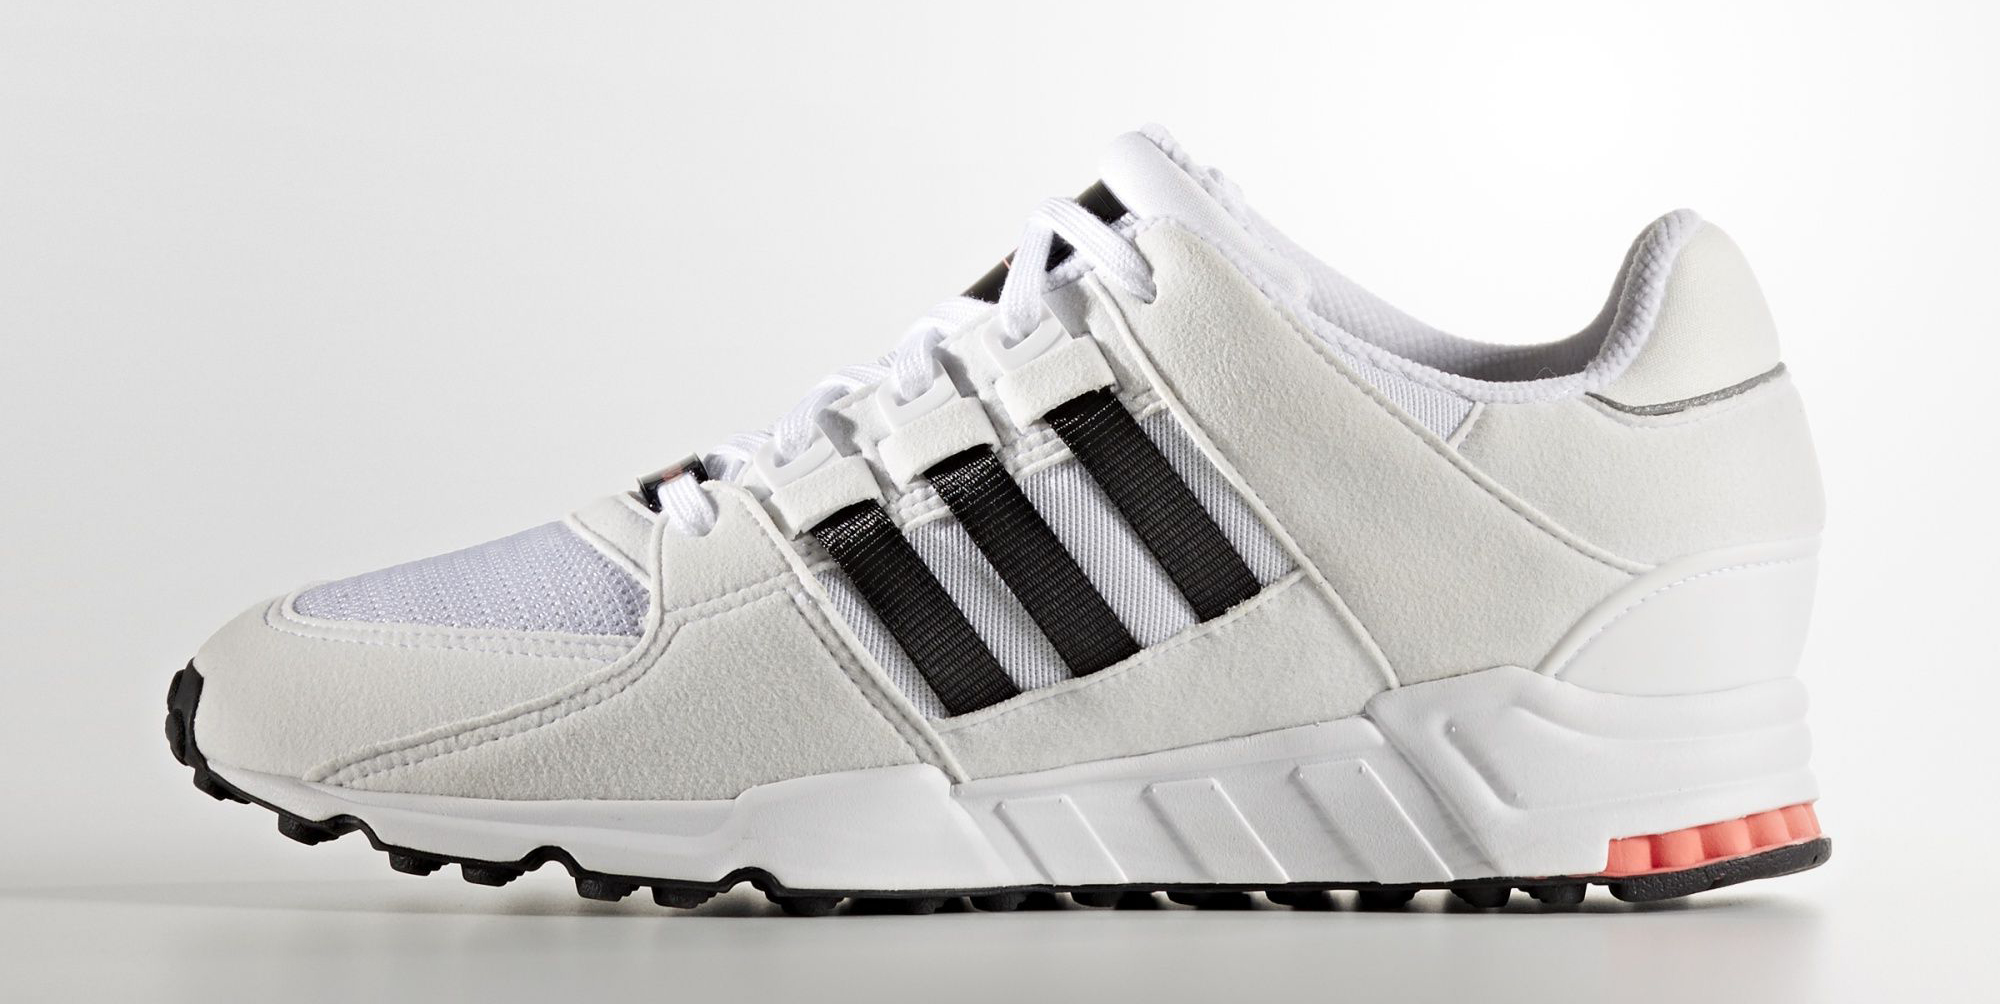 adidas-eqt-support-rf-white-turbo-red-1